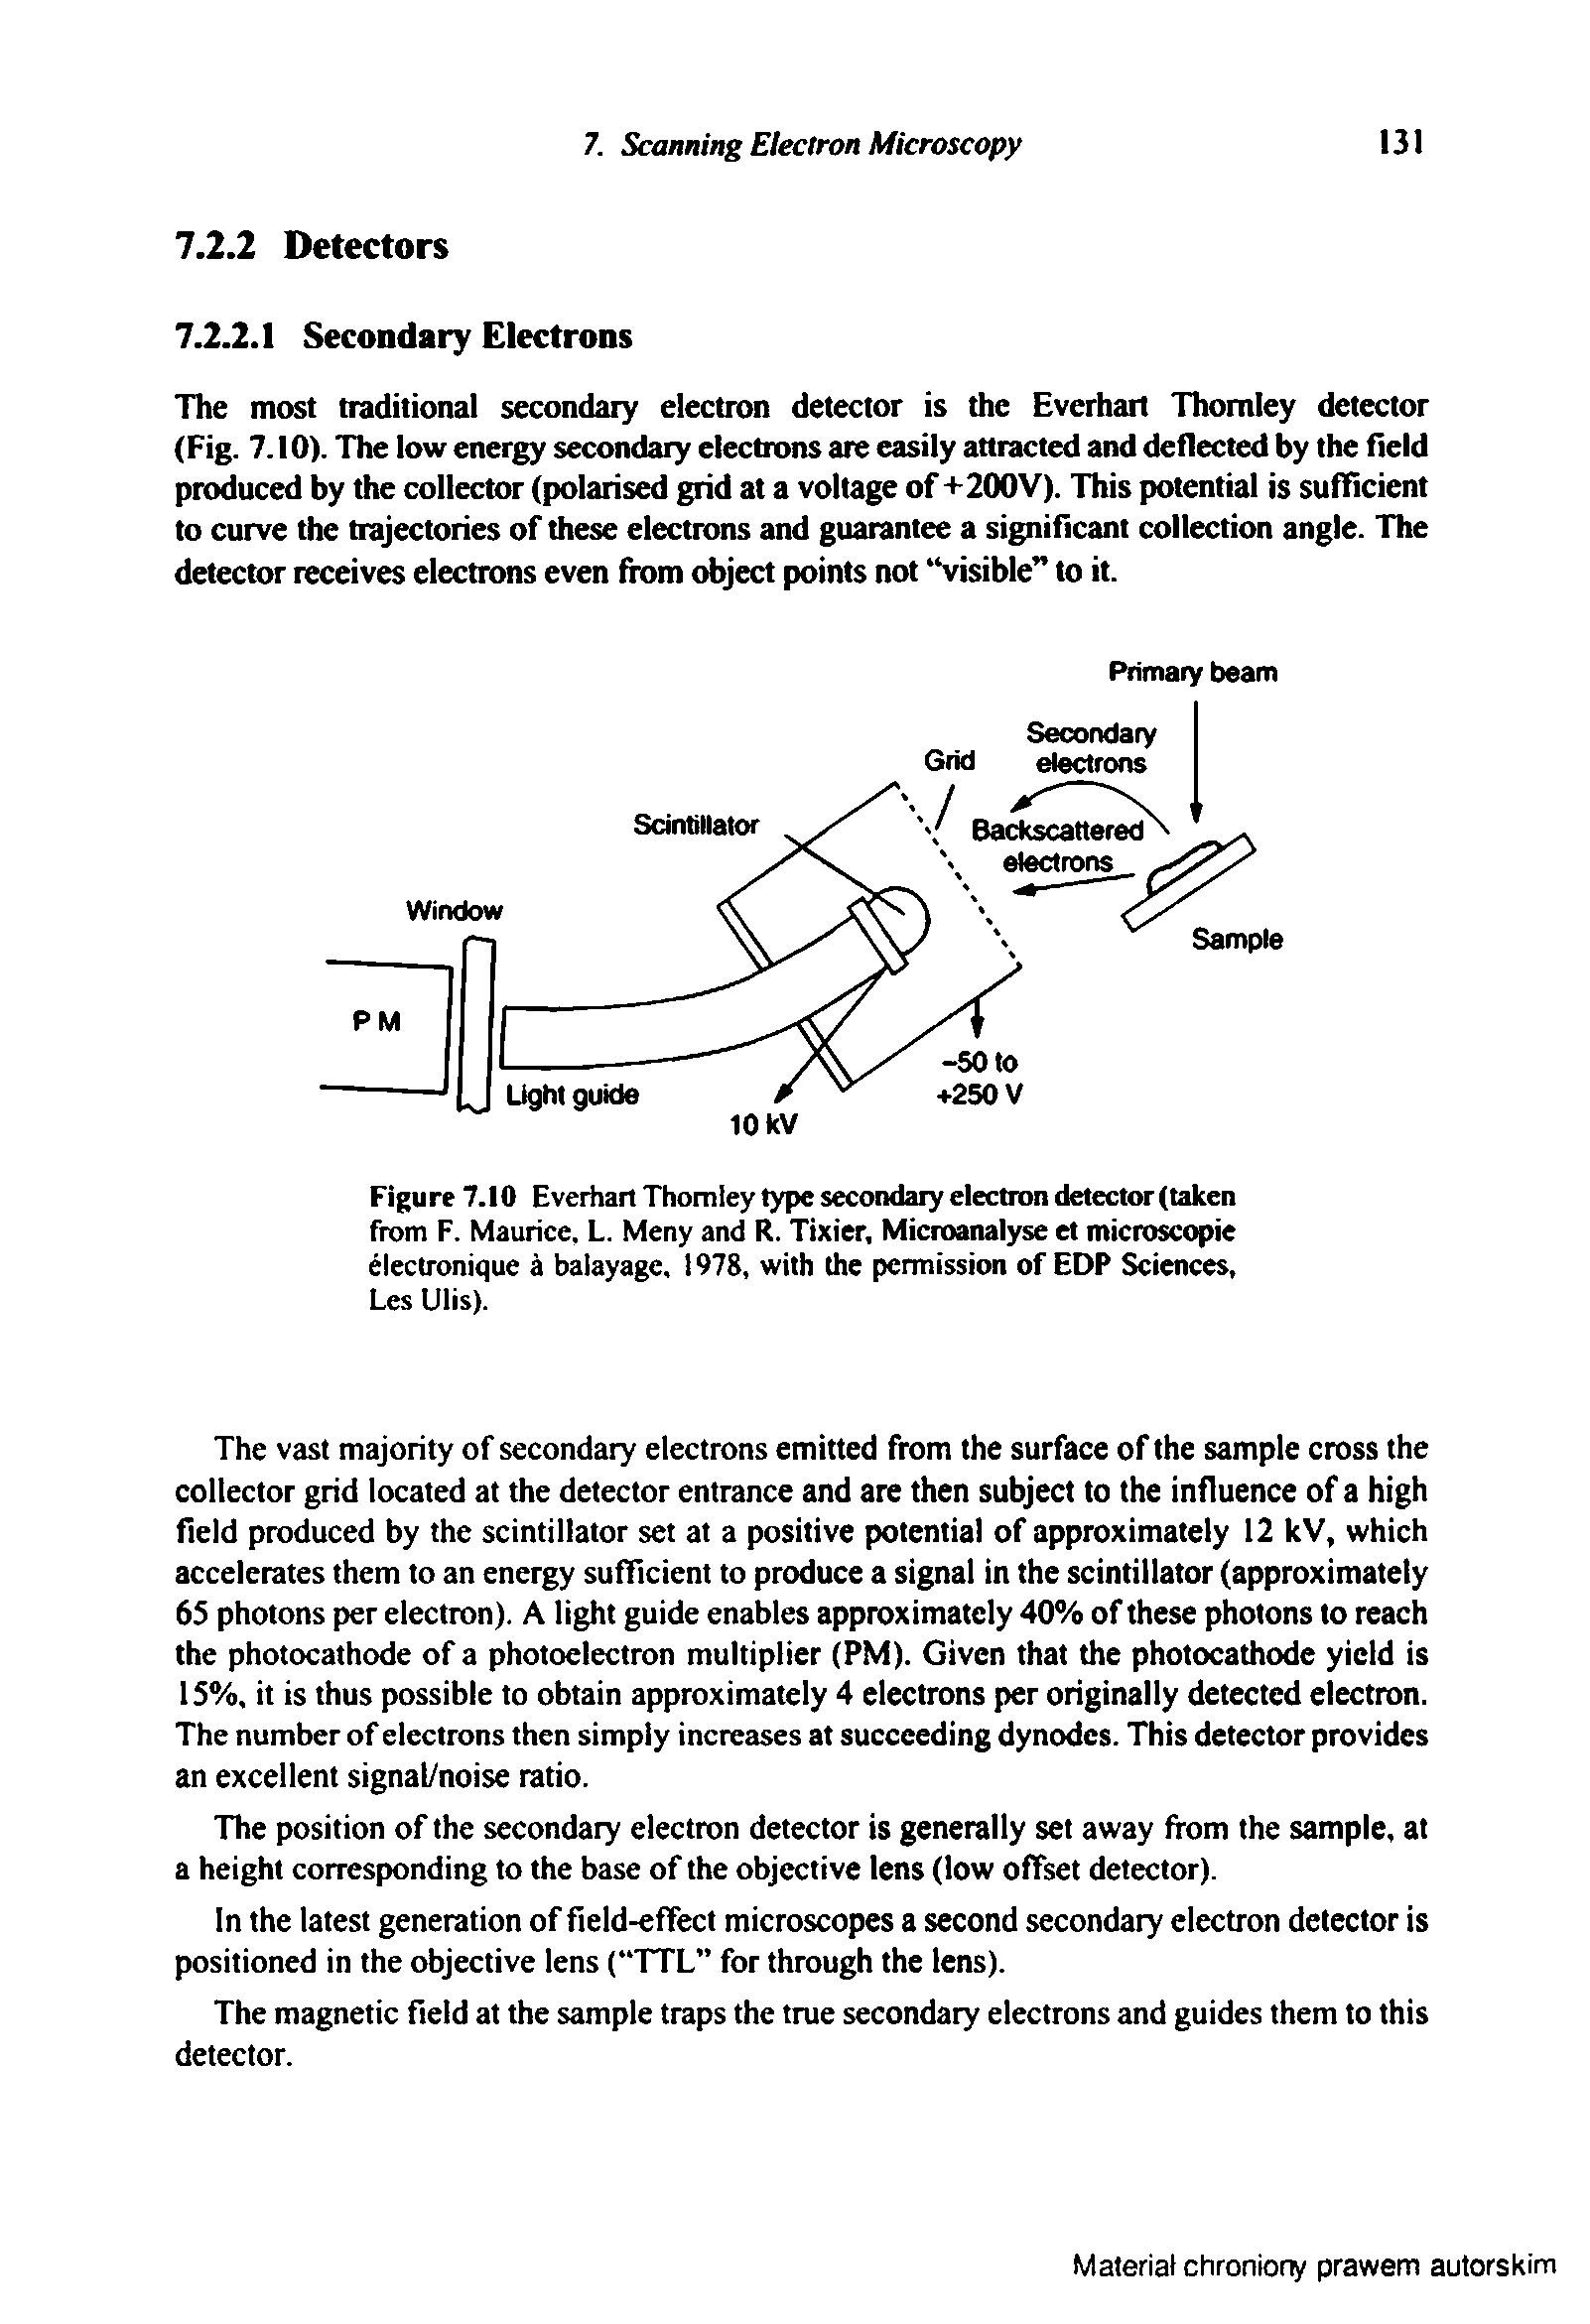 Figure 7.10 Everhart Thomley type secondary electron detector (taken from F. Maurice, L. Meny and R. Ttxier, Microanalyse et microscopie electronique a balayage, 1978, with the permission of EDP Sciences, Les Ulis).